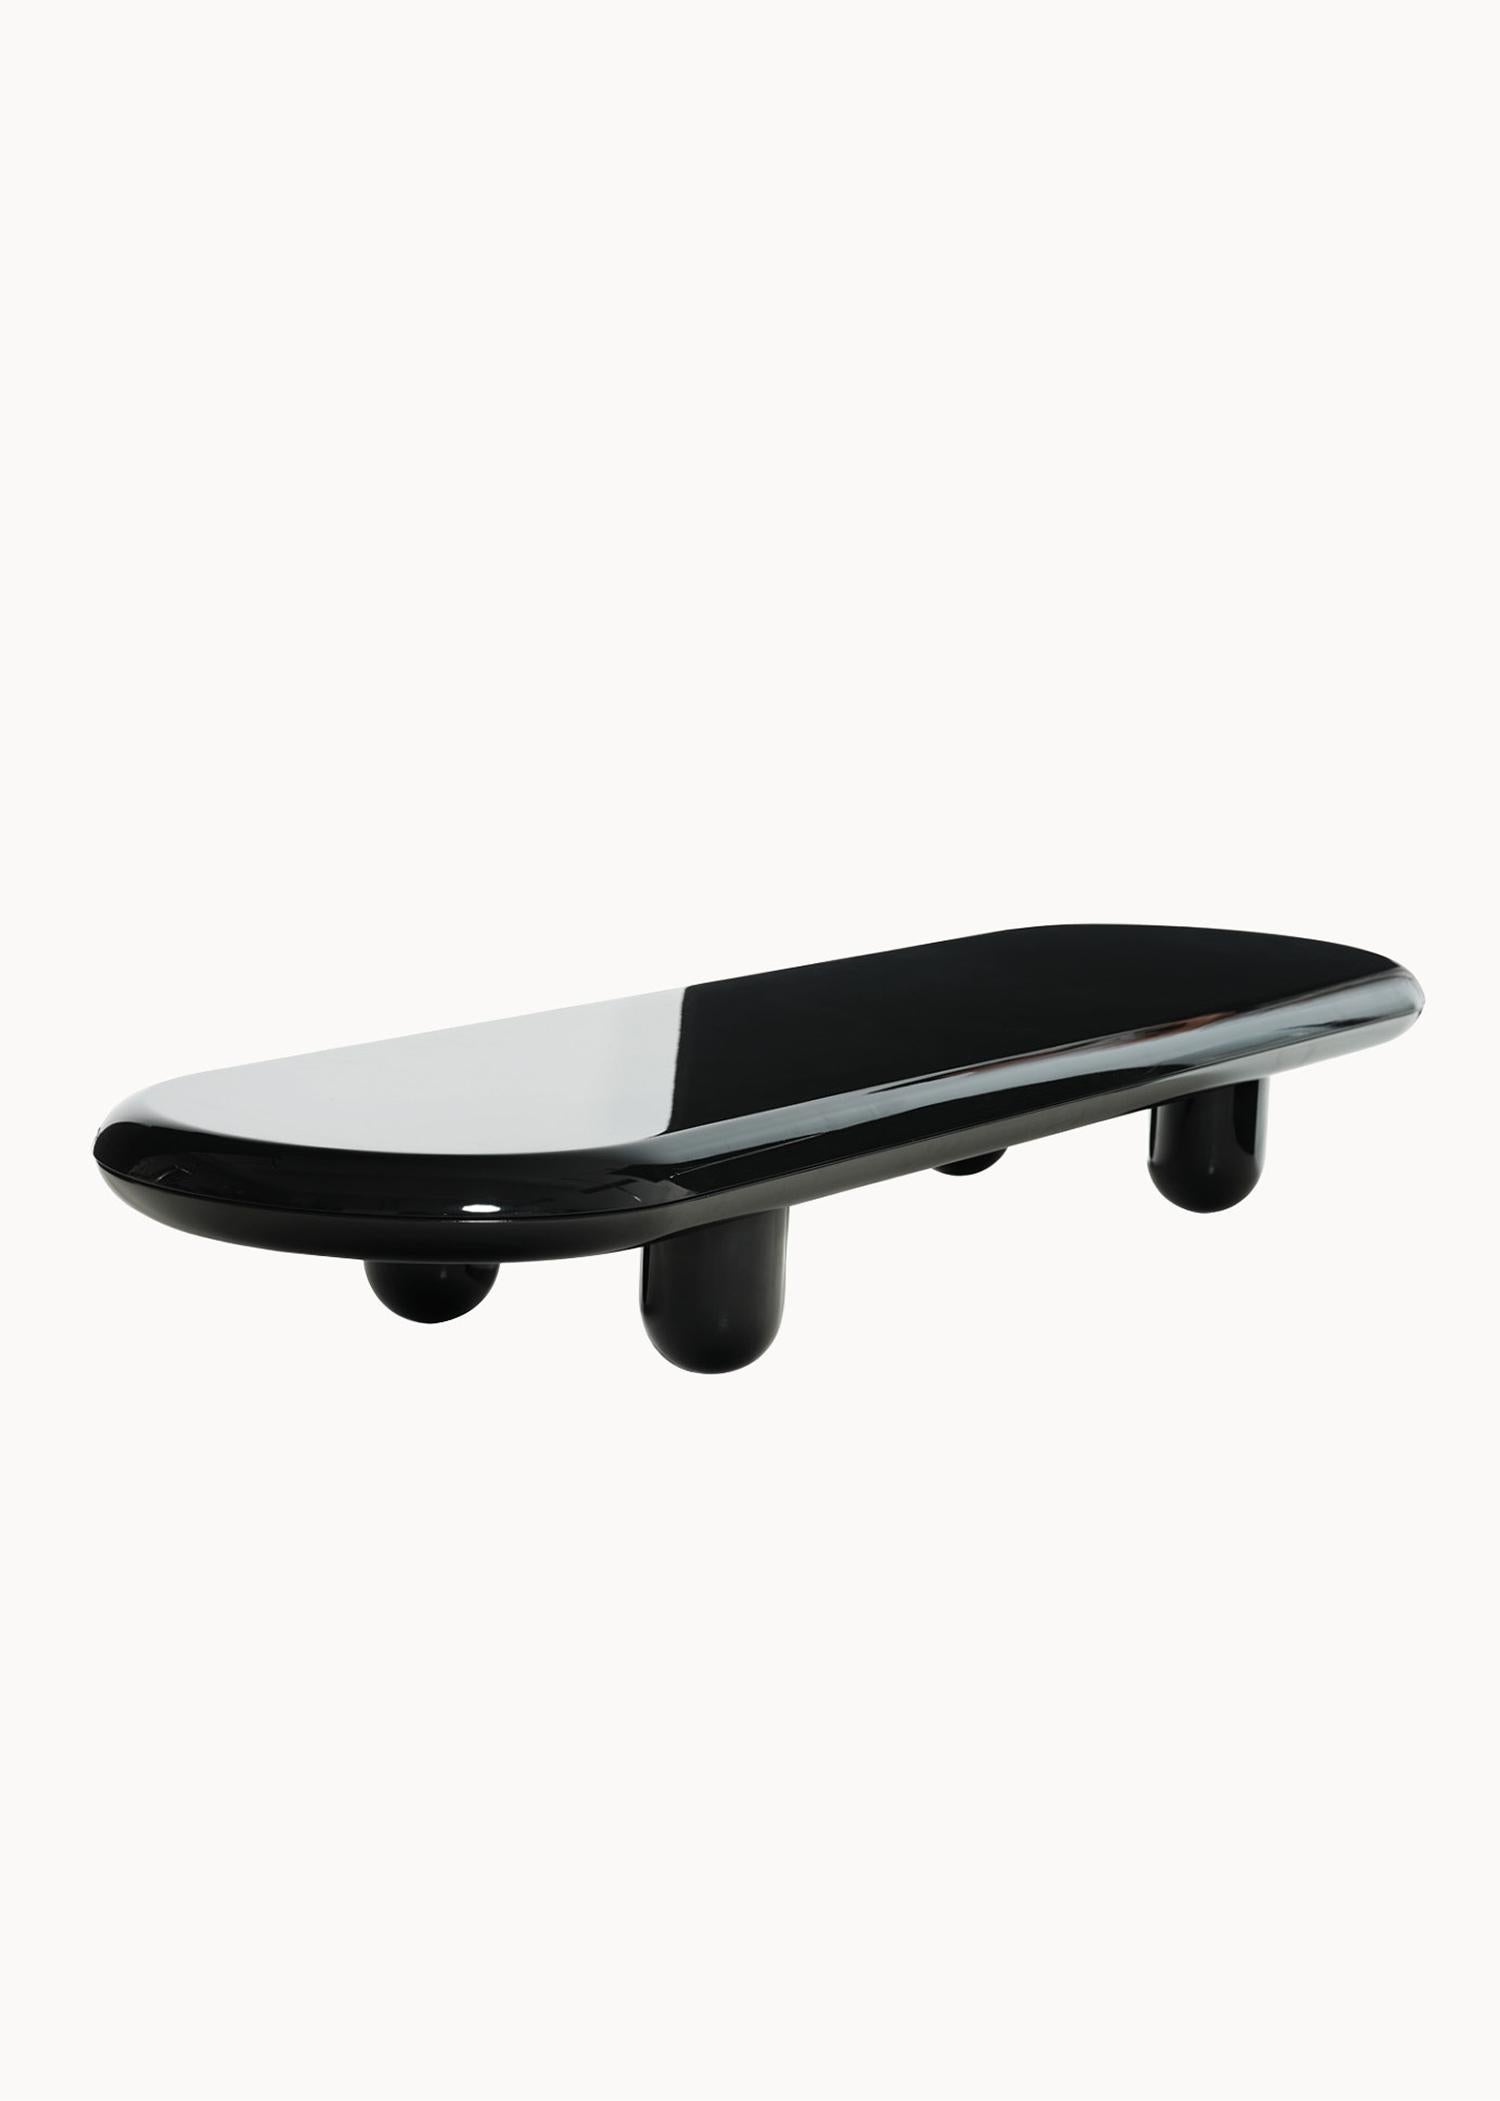 Organic Modern Contemporary Coffee Table 'Explorer' by Jaime Hayon, Black, 184 cm For Sale